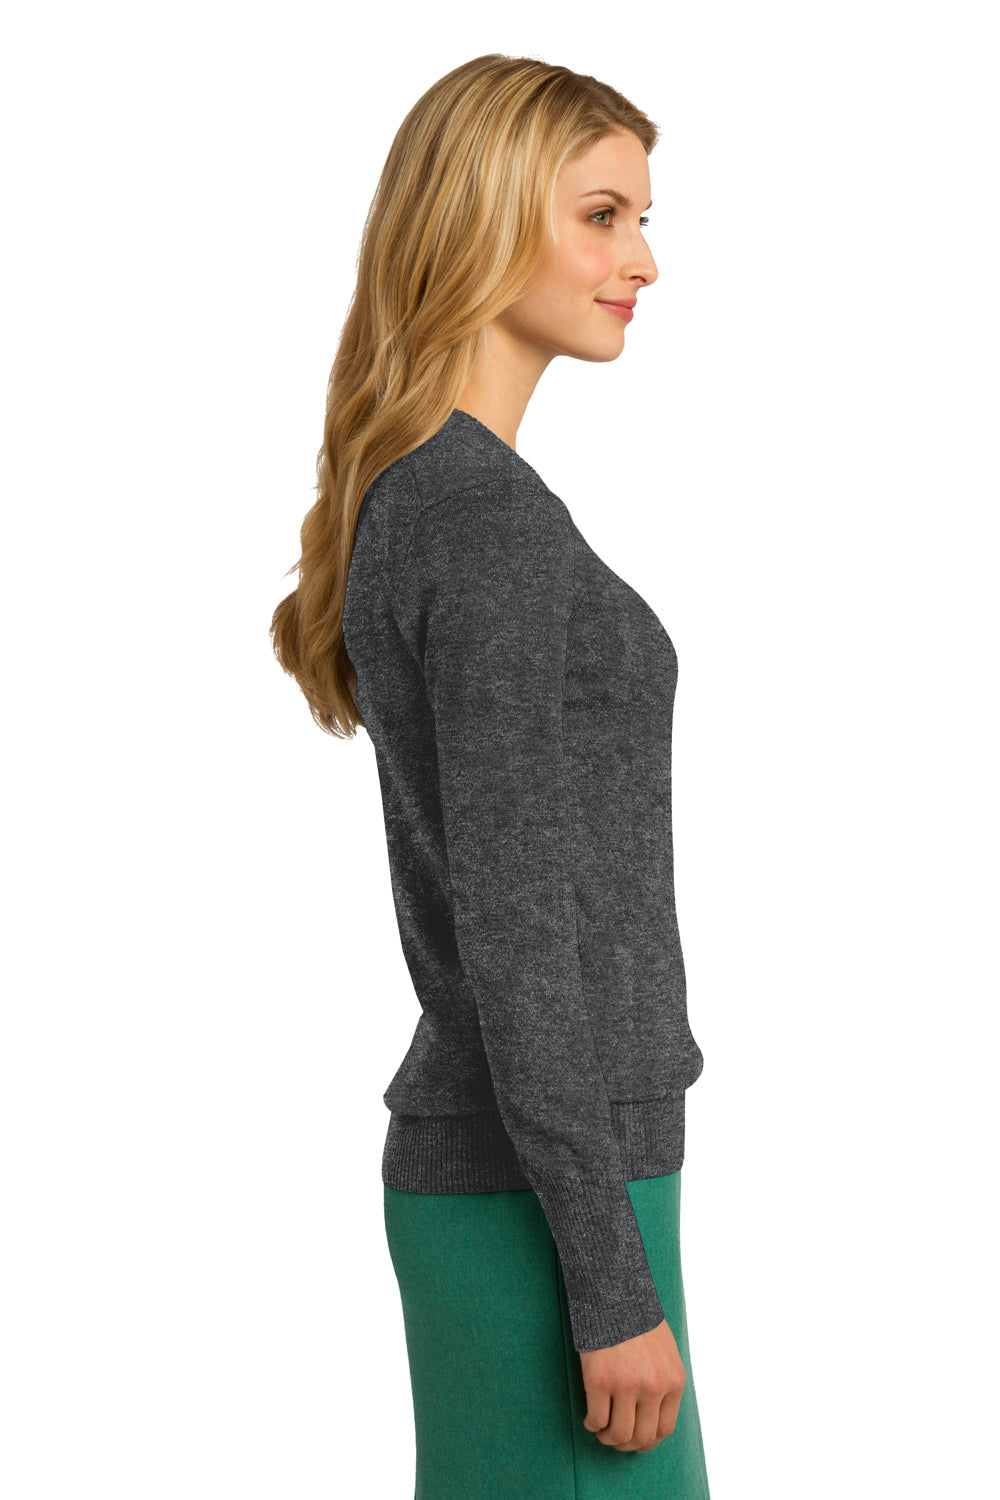 Port Authority LSW285 Womens Long Sleeve V-Neck Sweater Heather Charcoal Grey Side